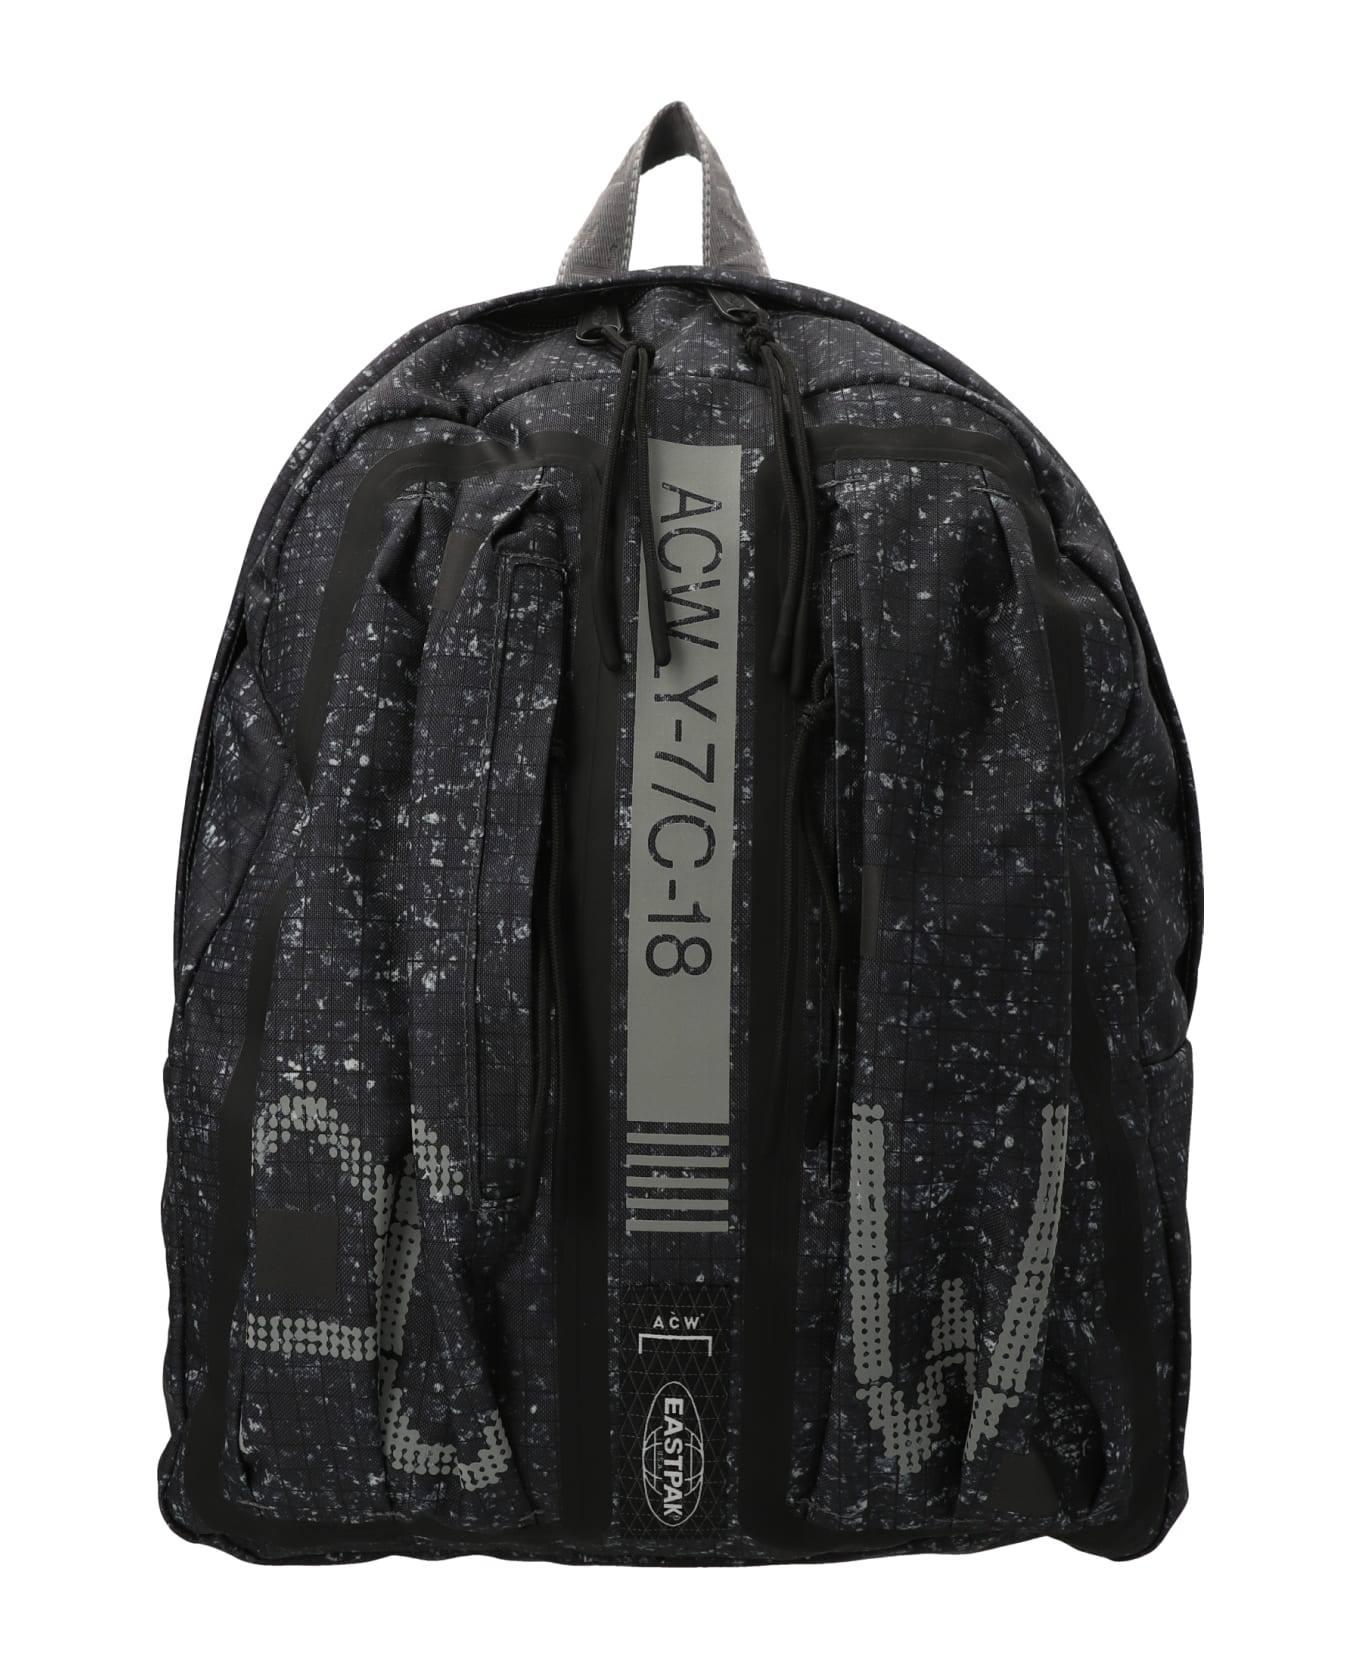 A-COLD-WALL * X Eastpak 'padded' Backpack - Black  